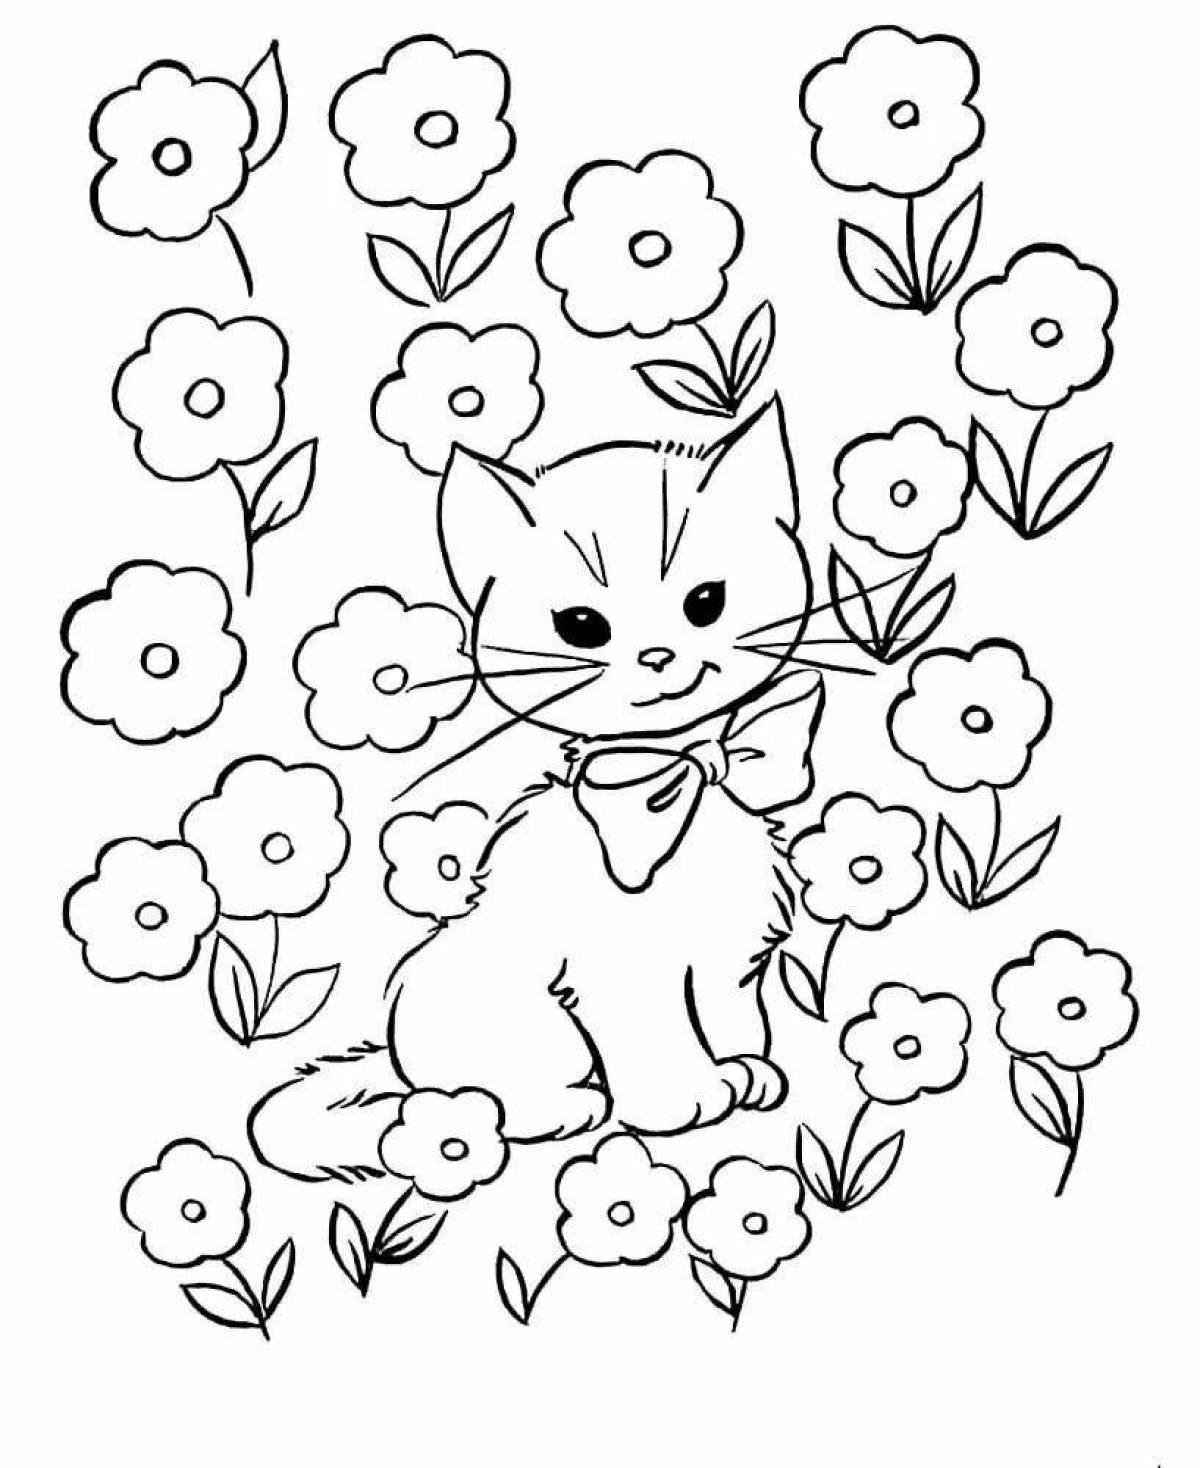 Adorable cat coloring book for 4-5 year olds